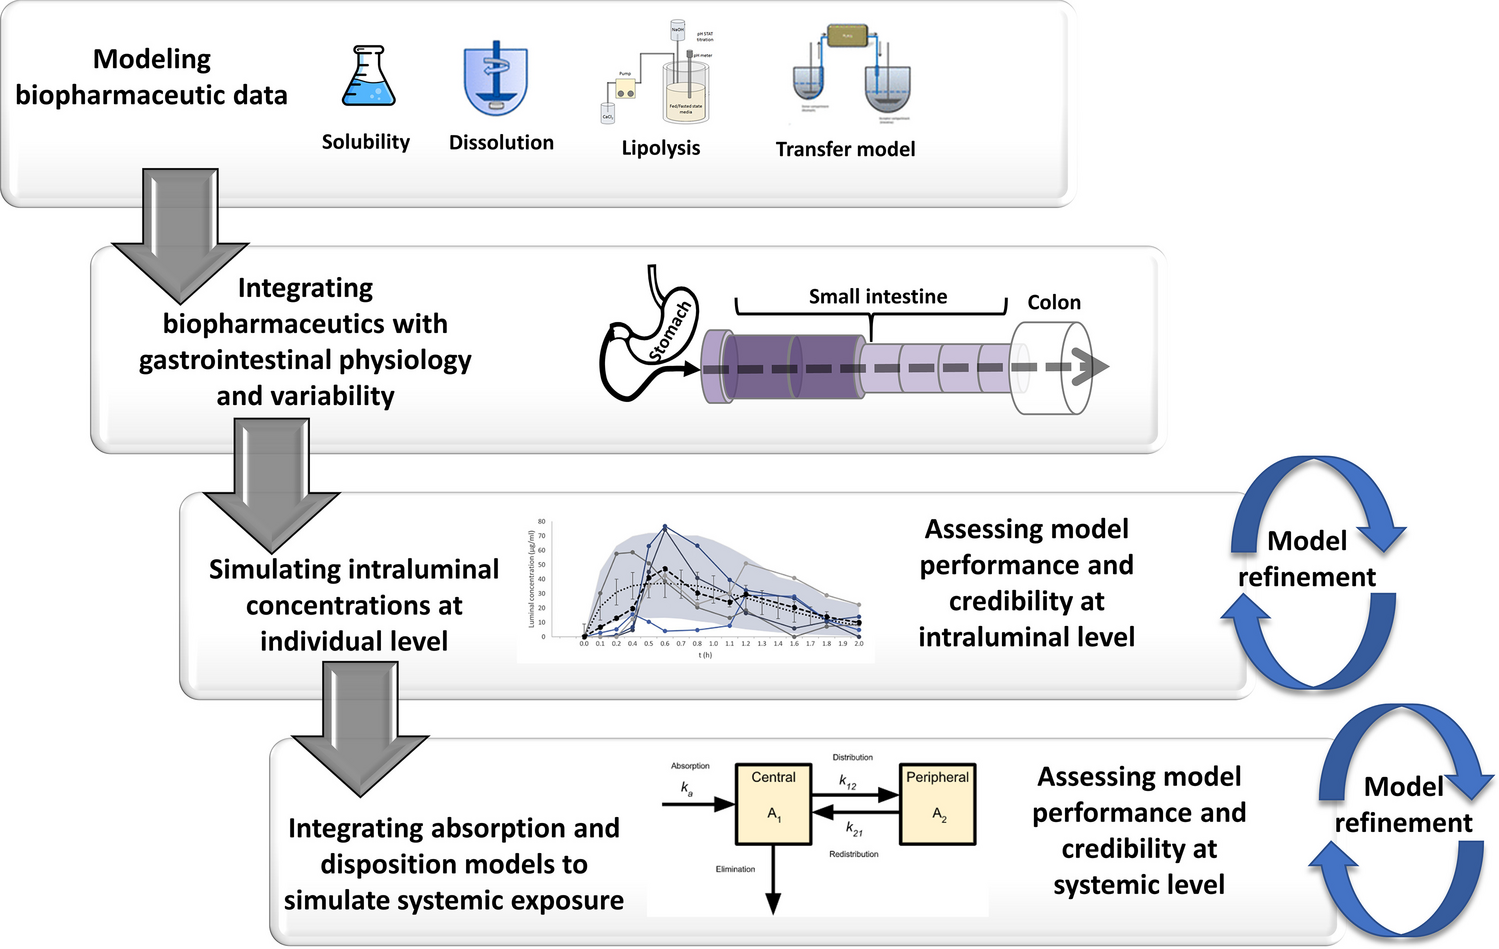 Mechanistic Modeling of In Vitro Biopharmaceutic Data for a Weak Acid Drug: A Pathway Towards Deriving Fundamental Parameters for Physiologically Based Biopharmaceutic Modeling